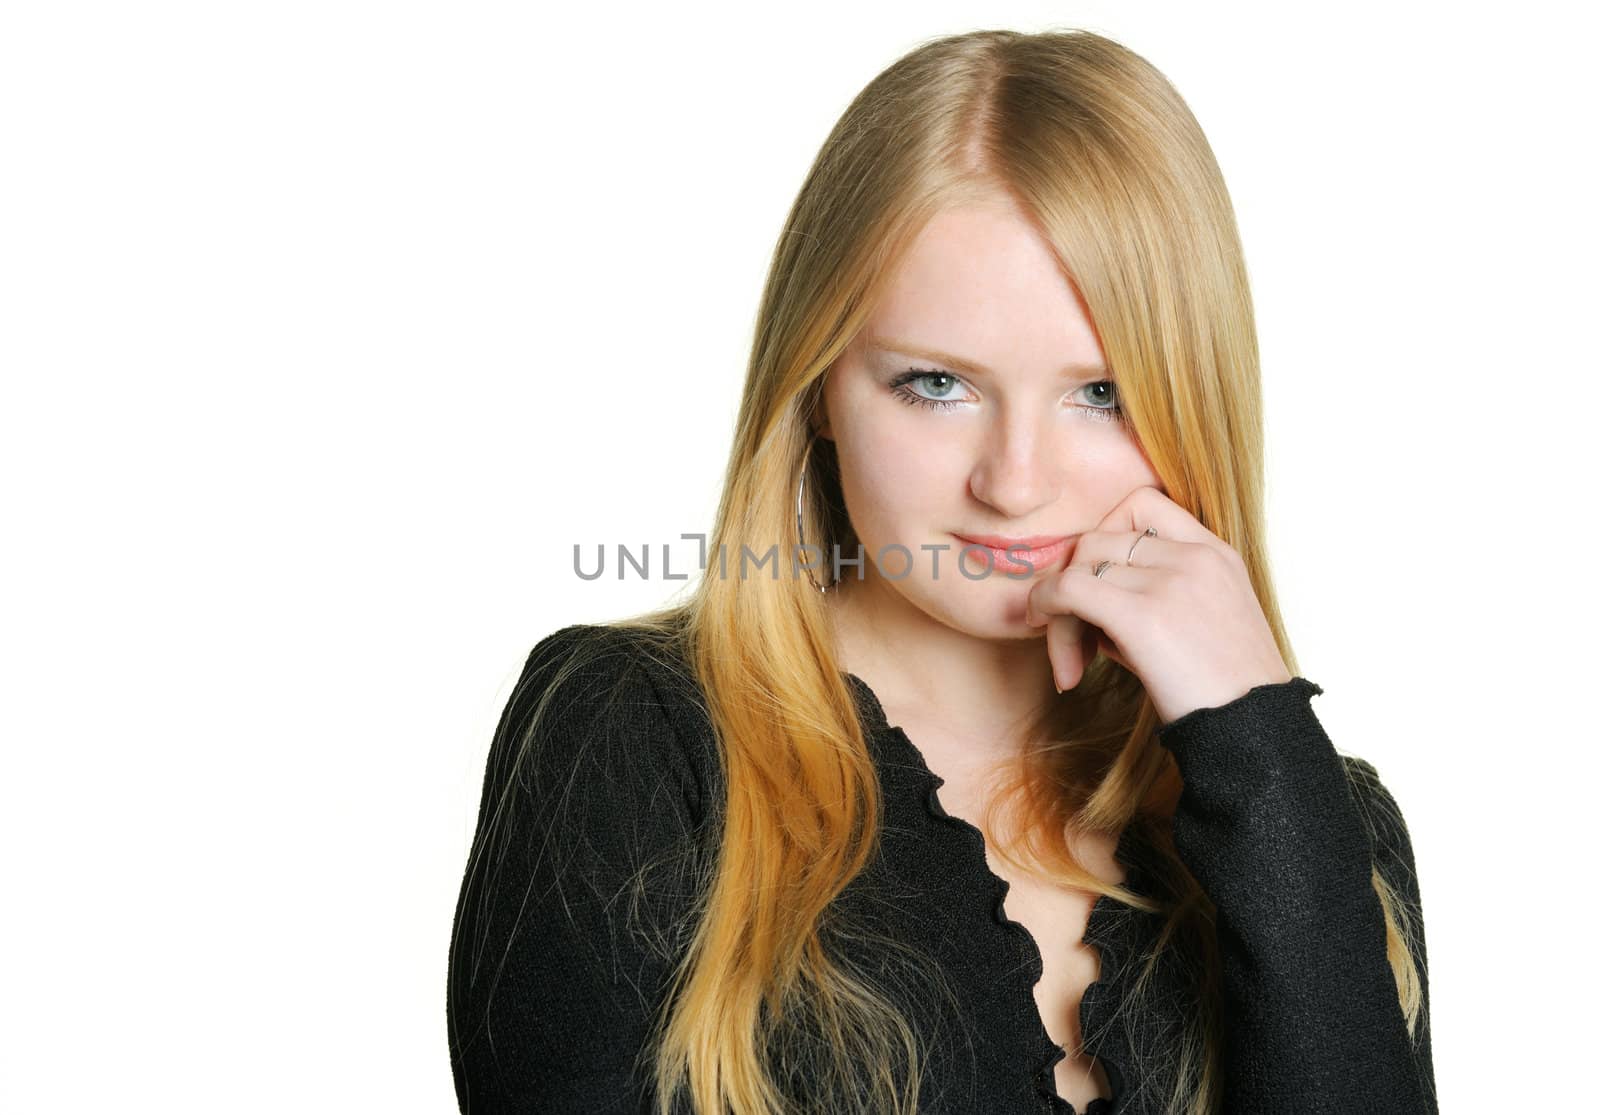 Portrait of the pretty young girl of the blonde. On a white background